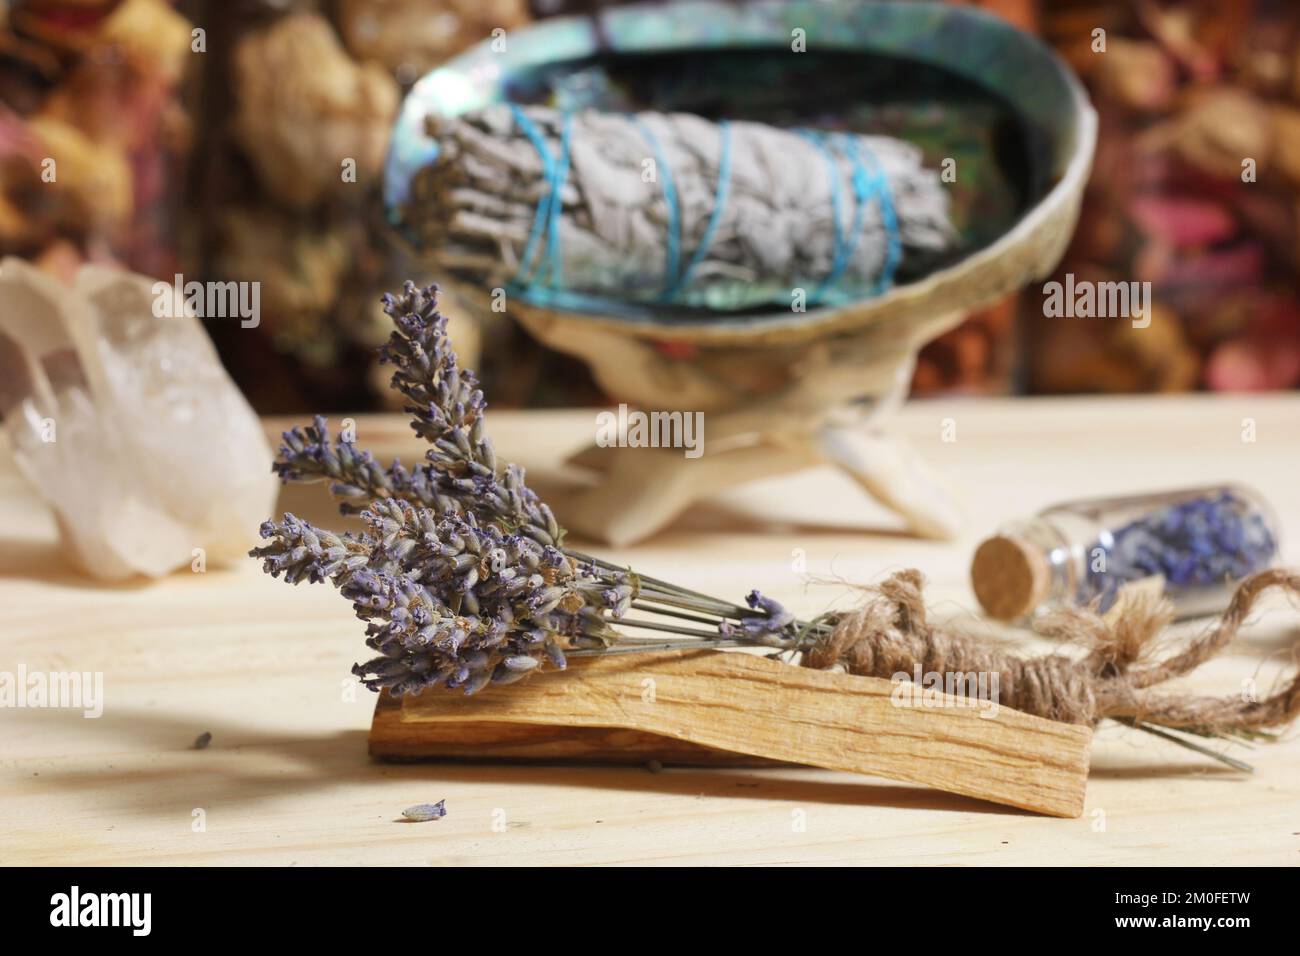 Dried Lavender With Palo Santo Wood and Abalone Shell For Smudging Stock Photo